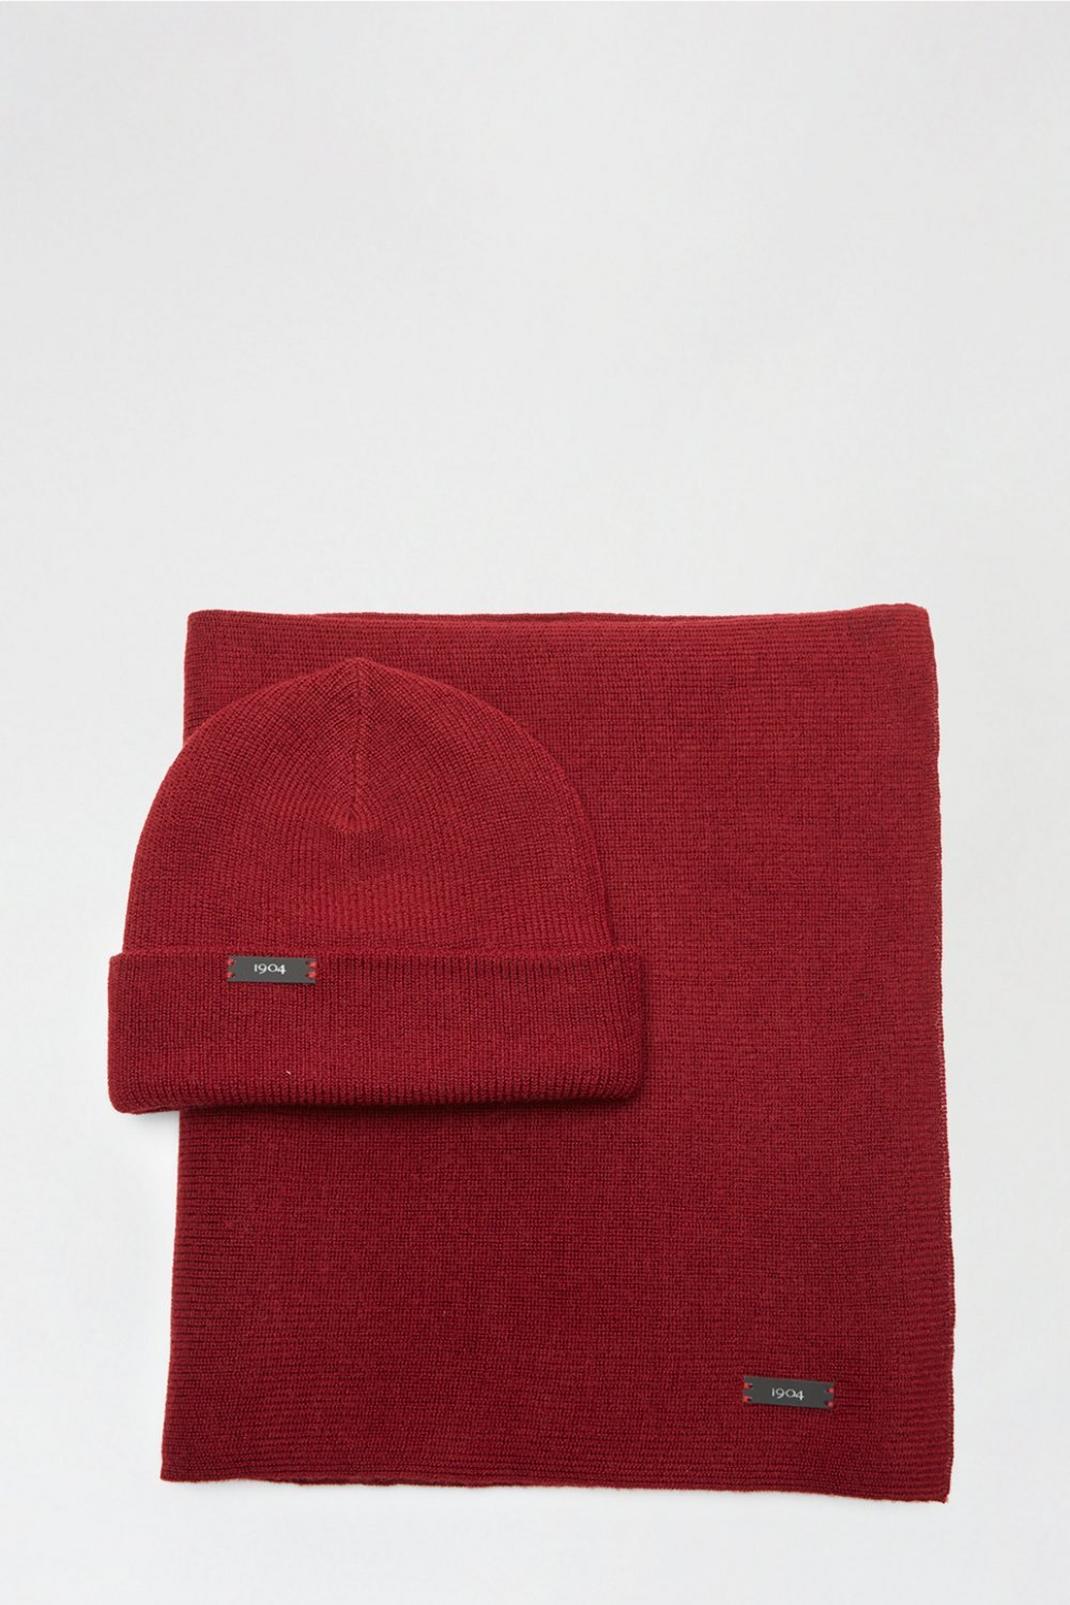 157 1904 Red Merino Blend Beanie And Scarf Gift Set image number 1